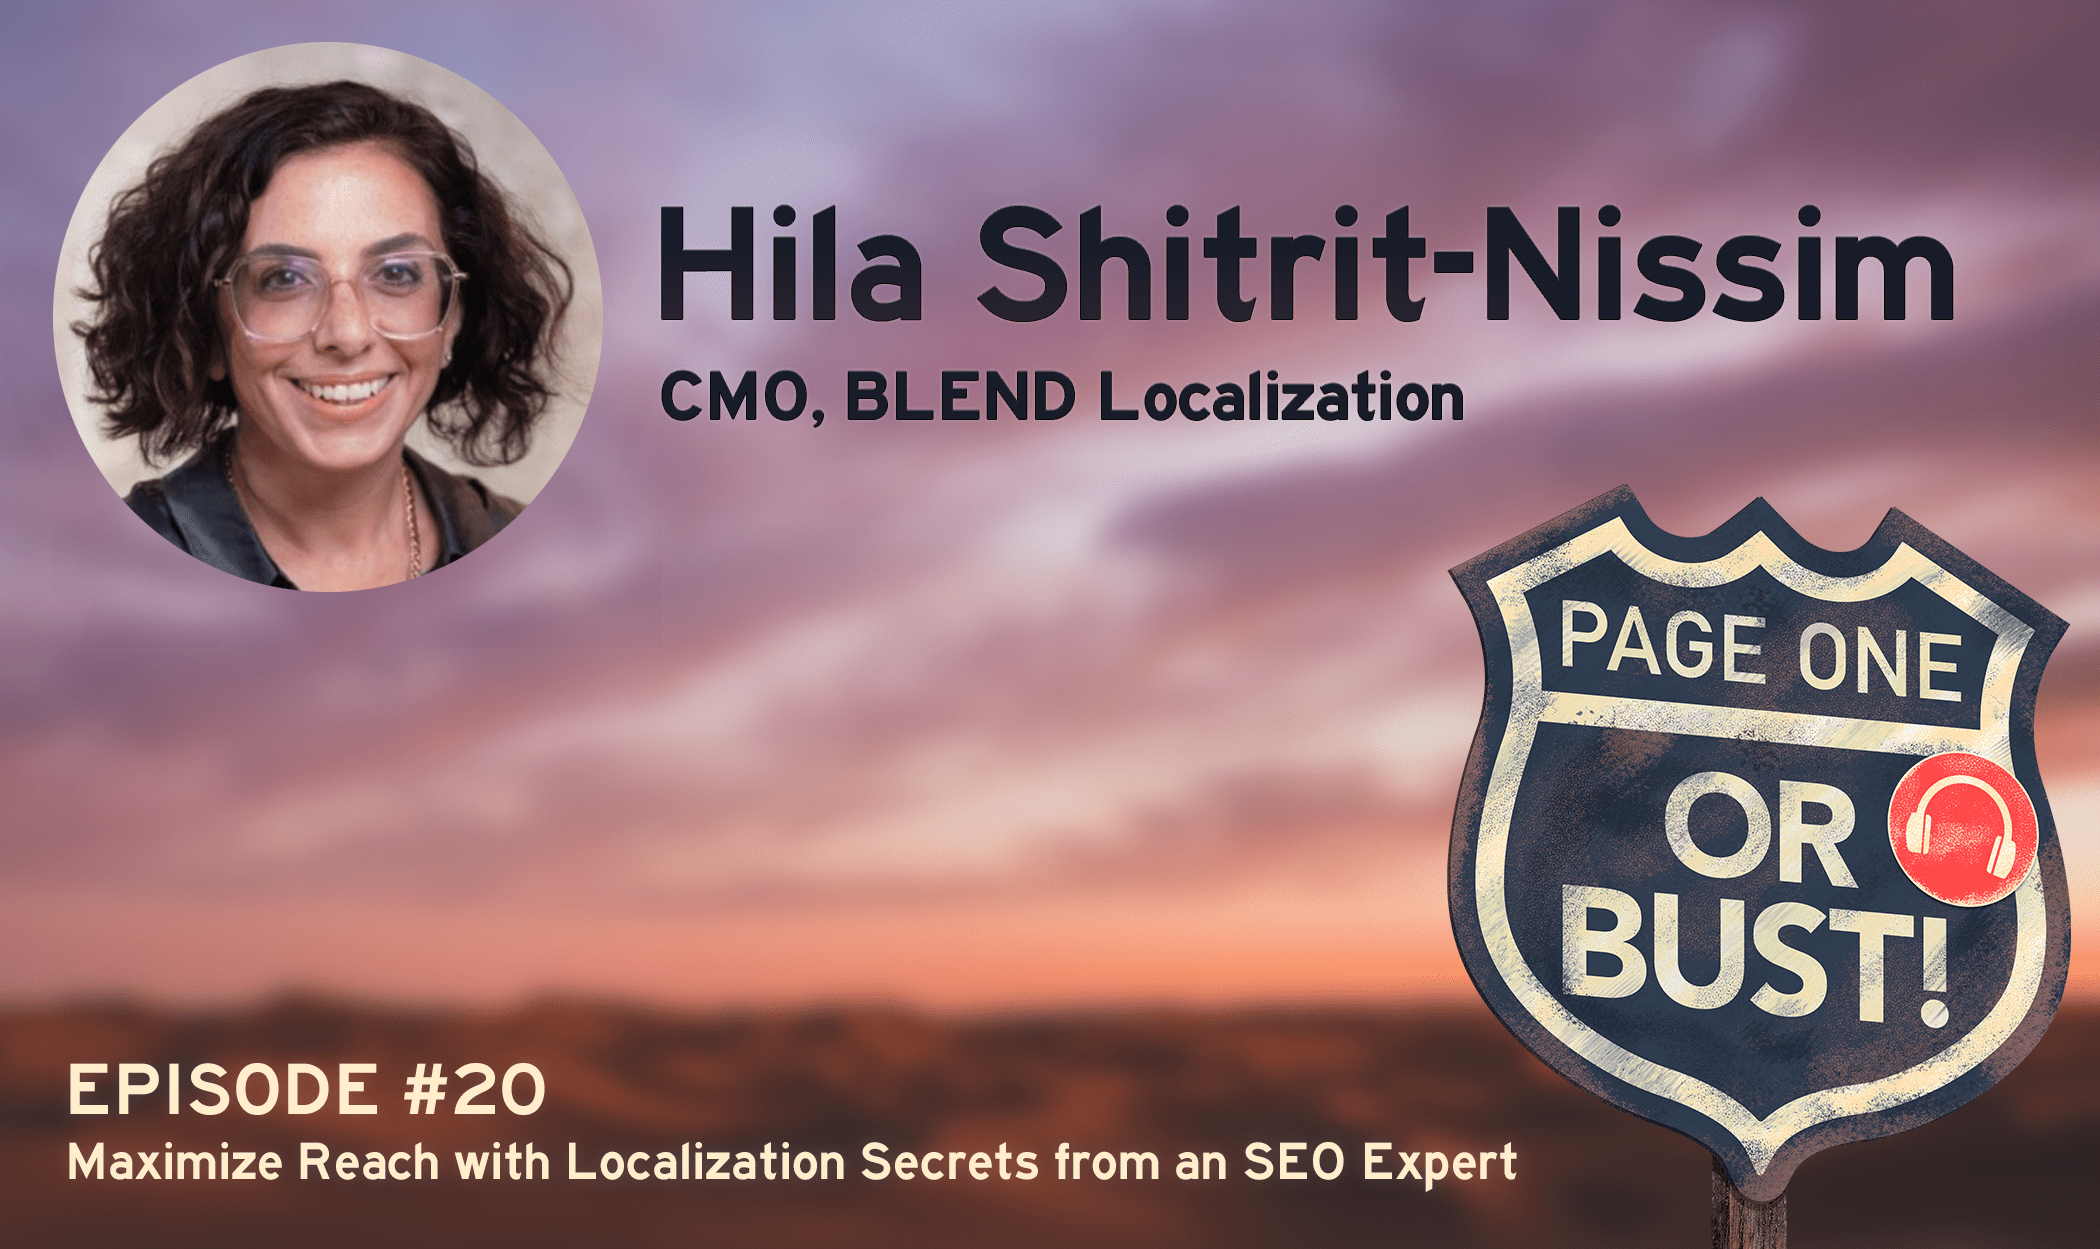 BLEND CMO Reveals SEO Localization Secrets on ‘Page One’ Podcast